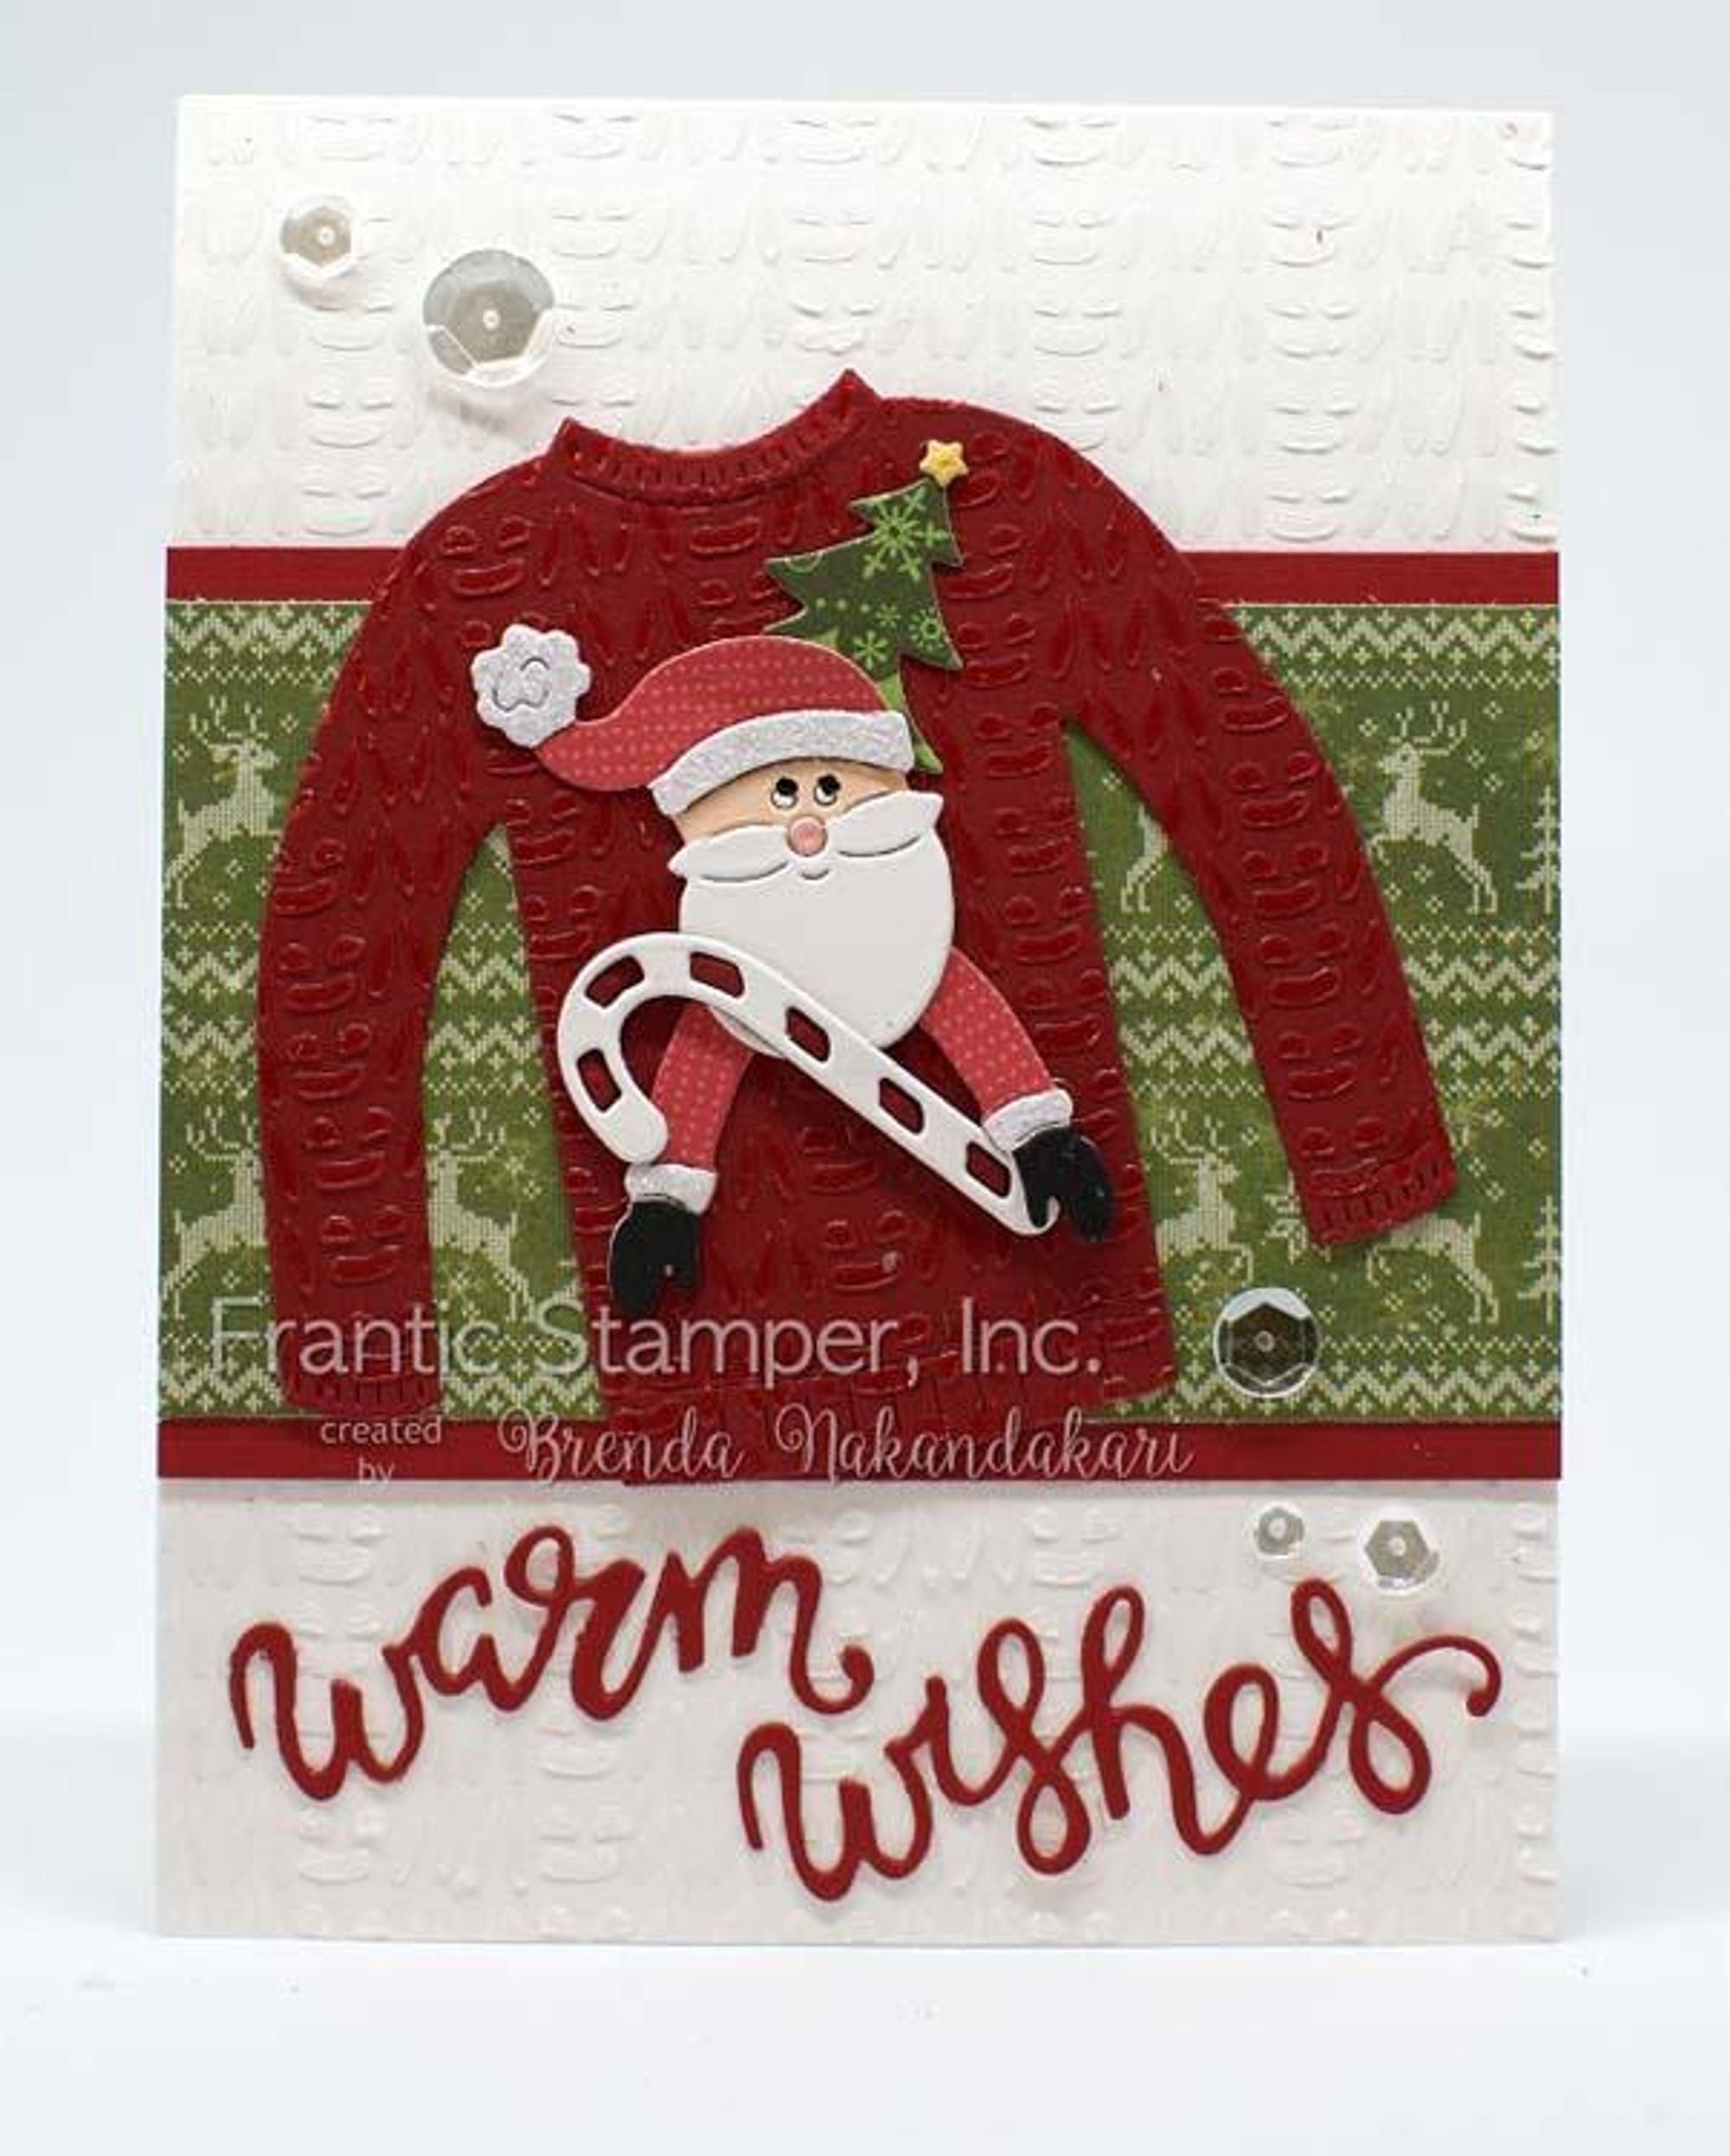 Frantic Stamper Precision Die - Ugly Sweater Icons